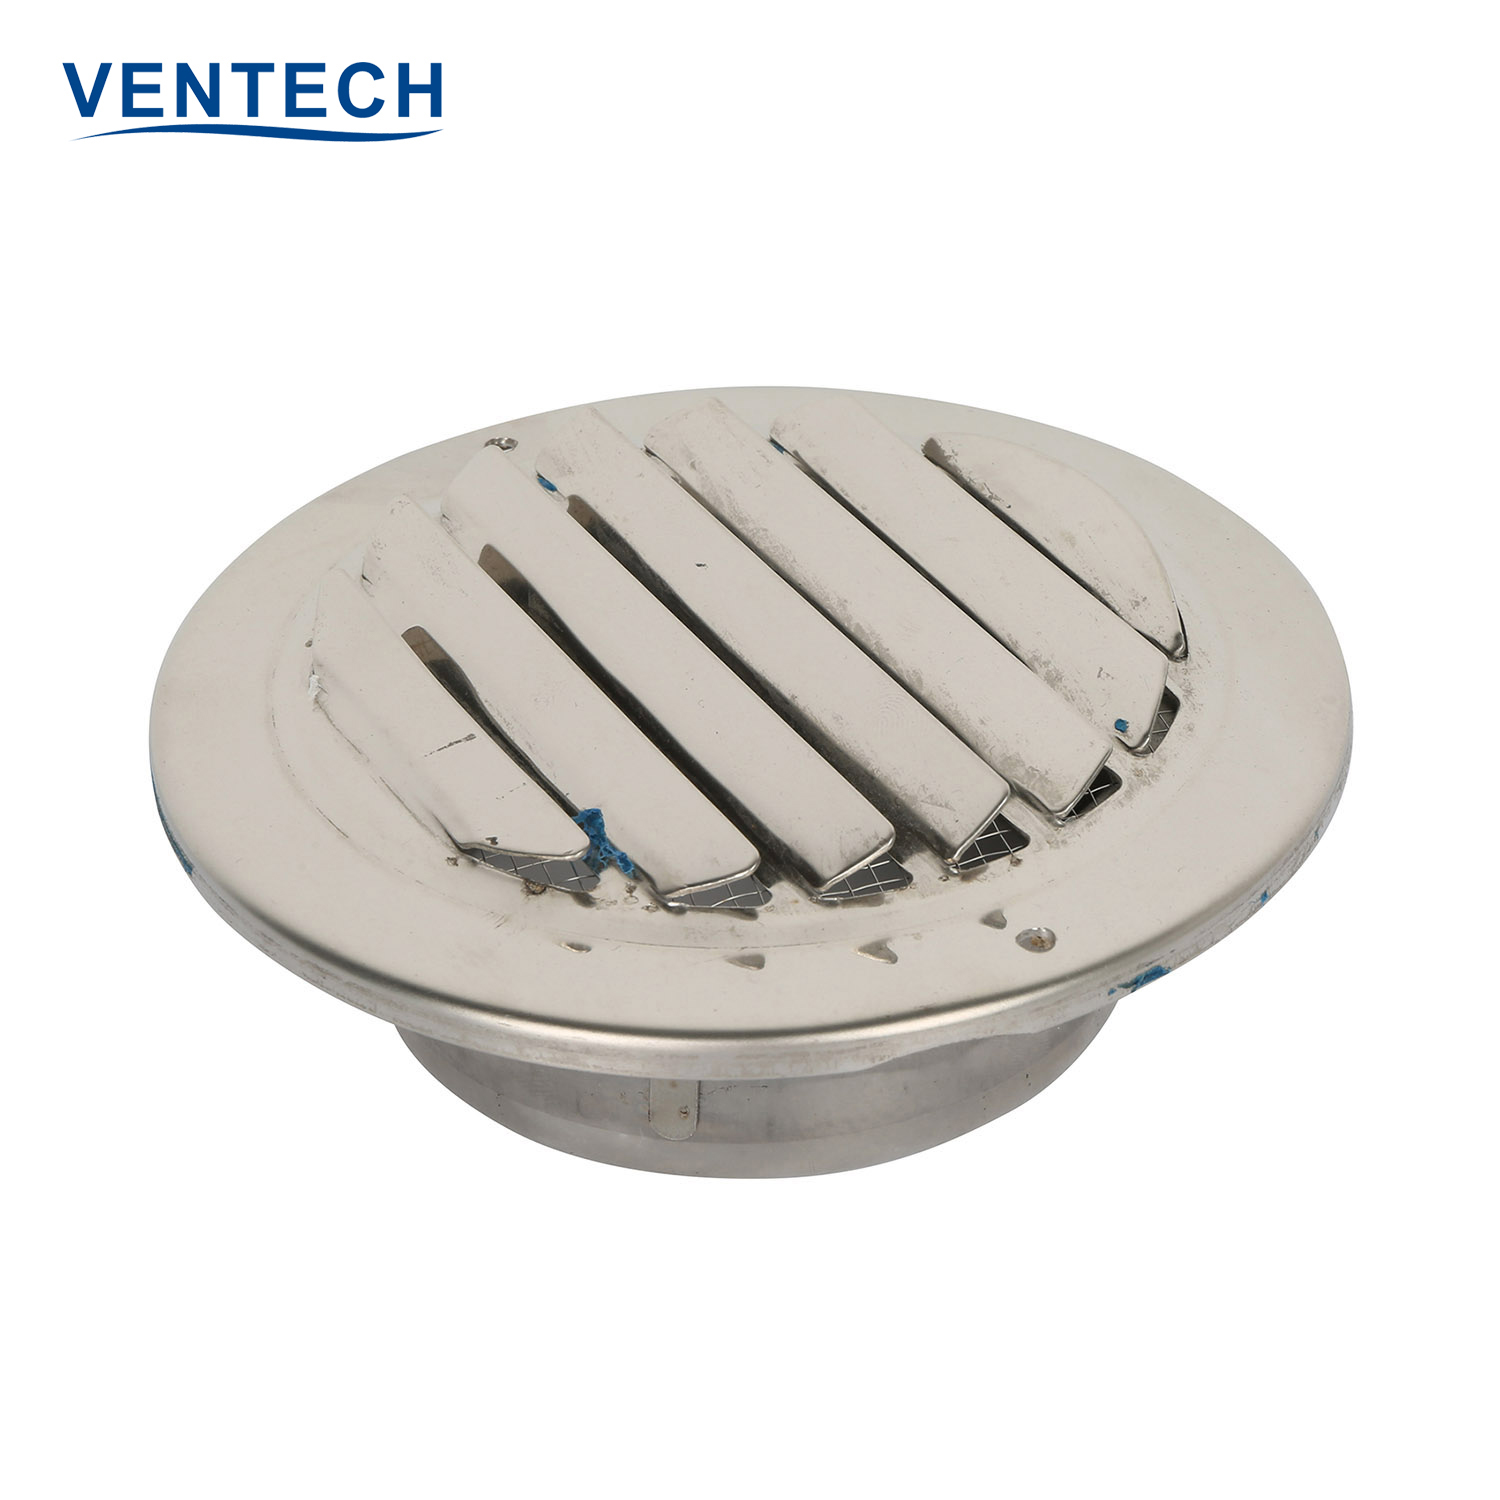 Ventech top intake air louver manufacturer for office budilings-2